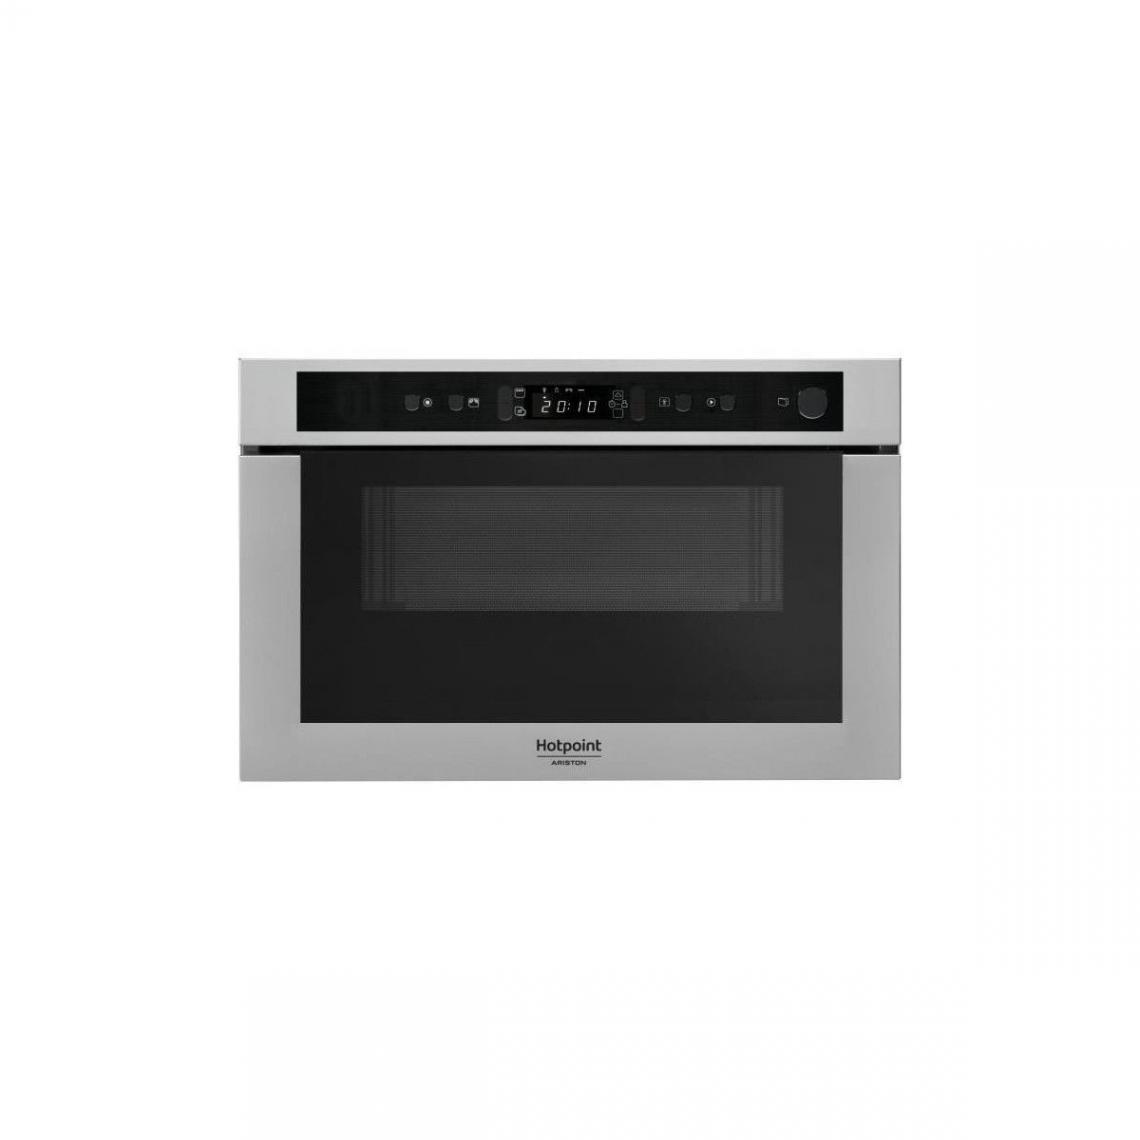 Hotpoint - Micro-ondes combiné encastrable inox anti-traceMH 400 IX - 22L - 750 W - Four micro-ondes